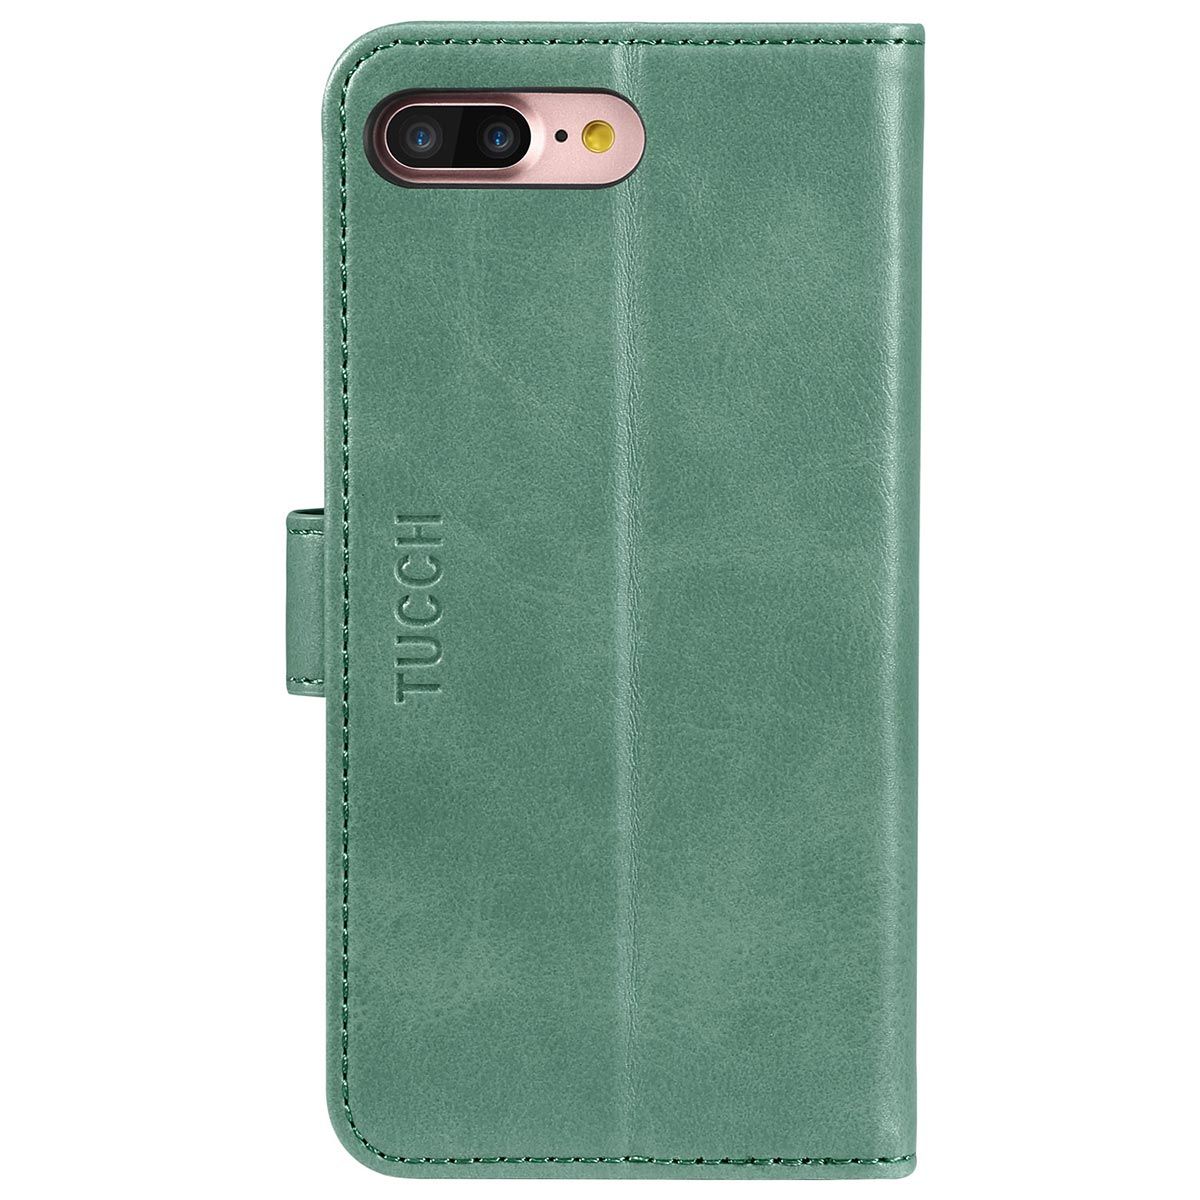 TUCCH iPhone 13 Mini Wallet Case - Mini iPhone 13 5.4-inch PU Leather Cover  with Kickstand Folio Flip Book Style, Magnetic Closure-Myrtle Green